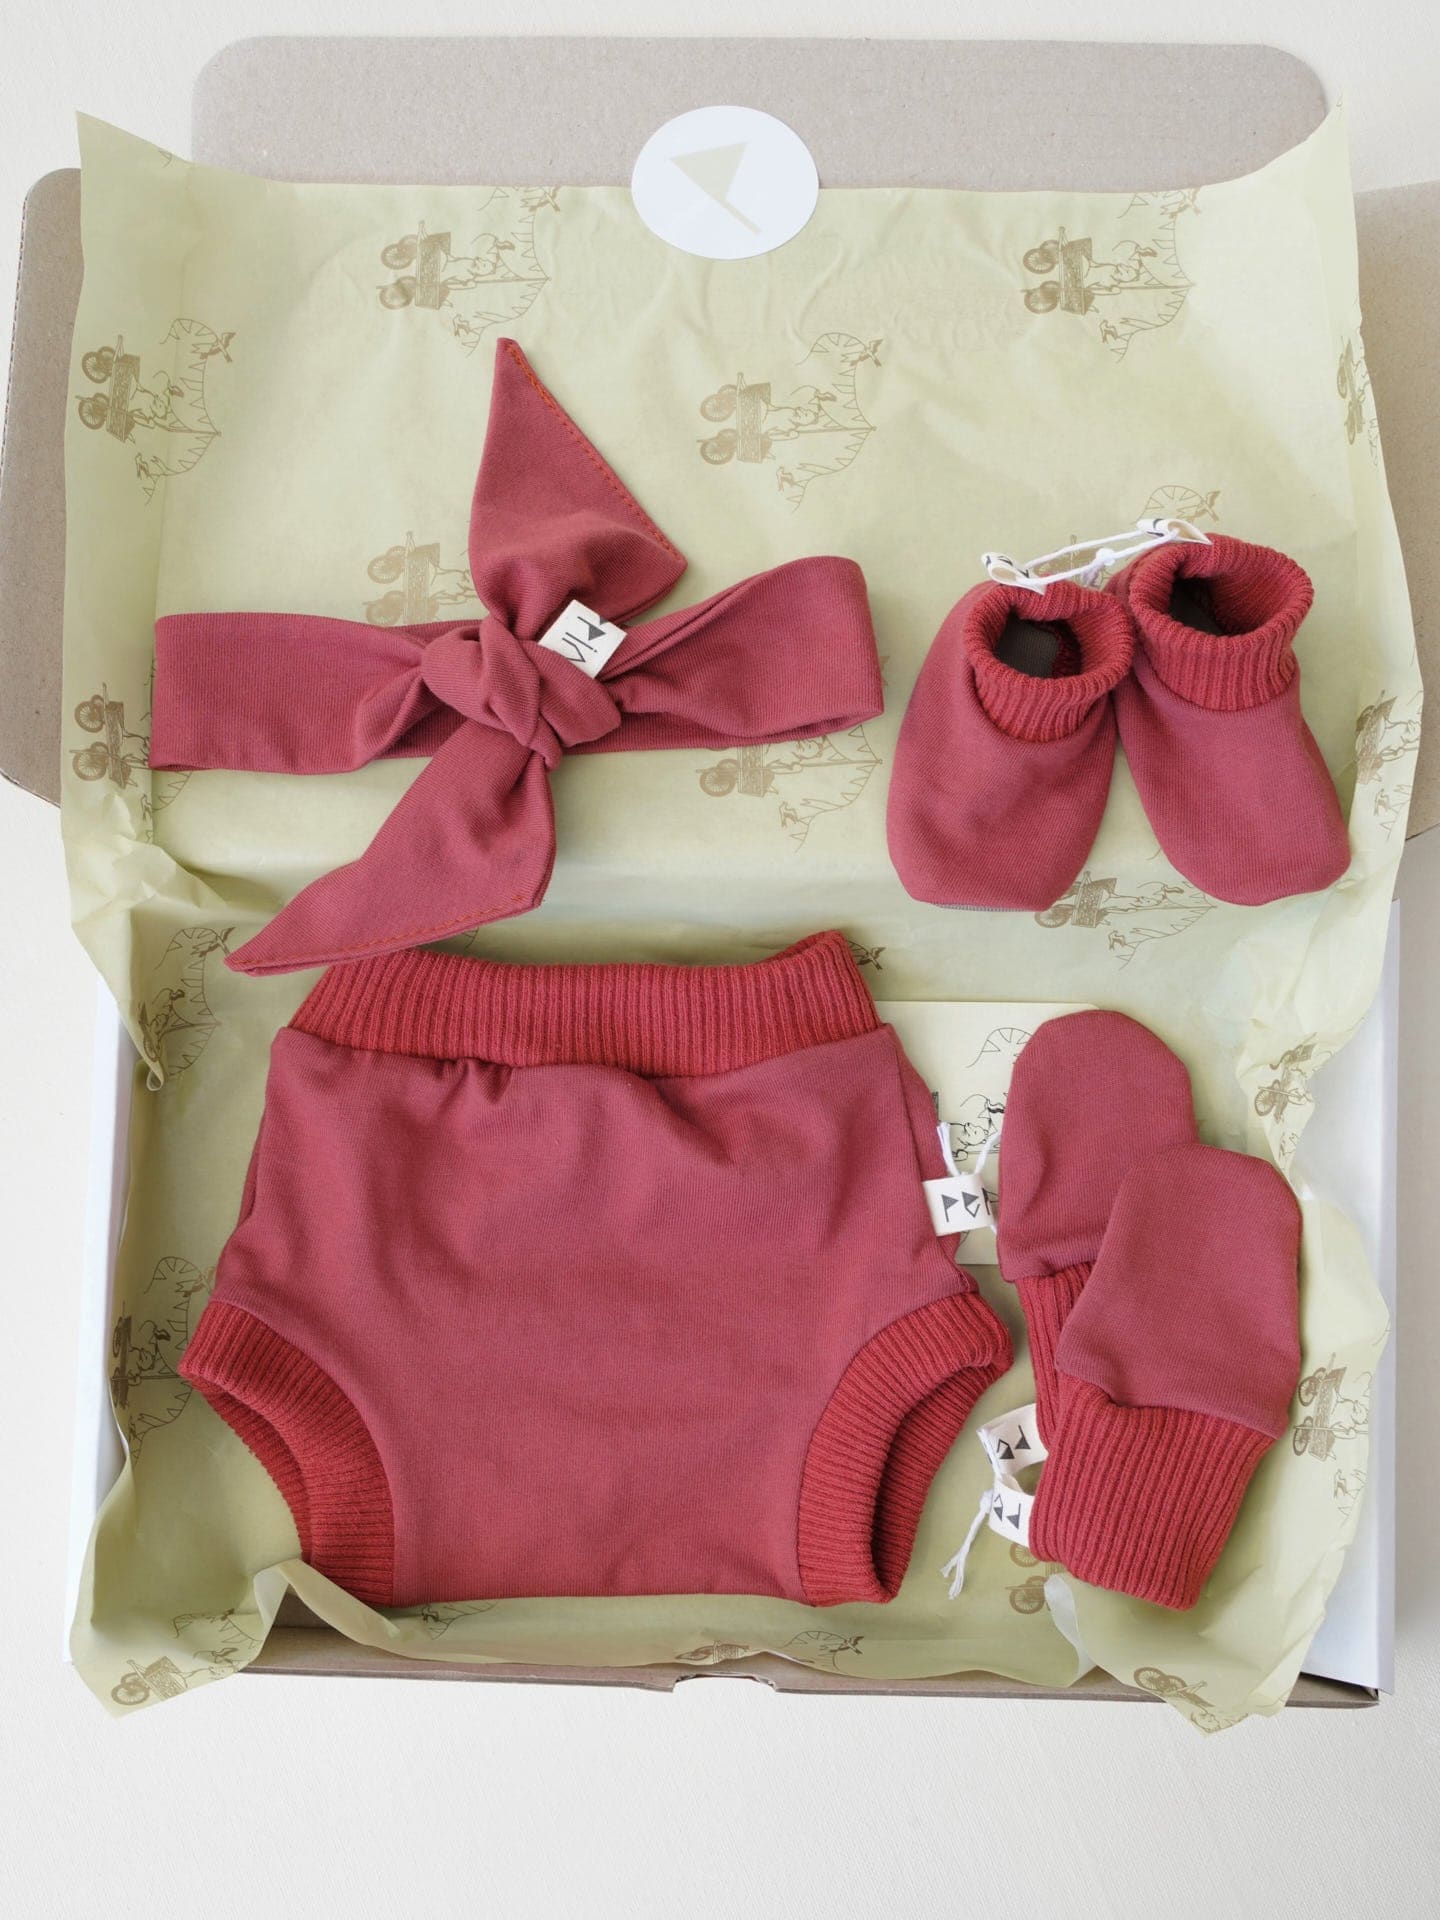 A Baby Gift Box - Brick by Peppin containing a baby's clothes and shoes.